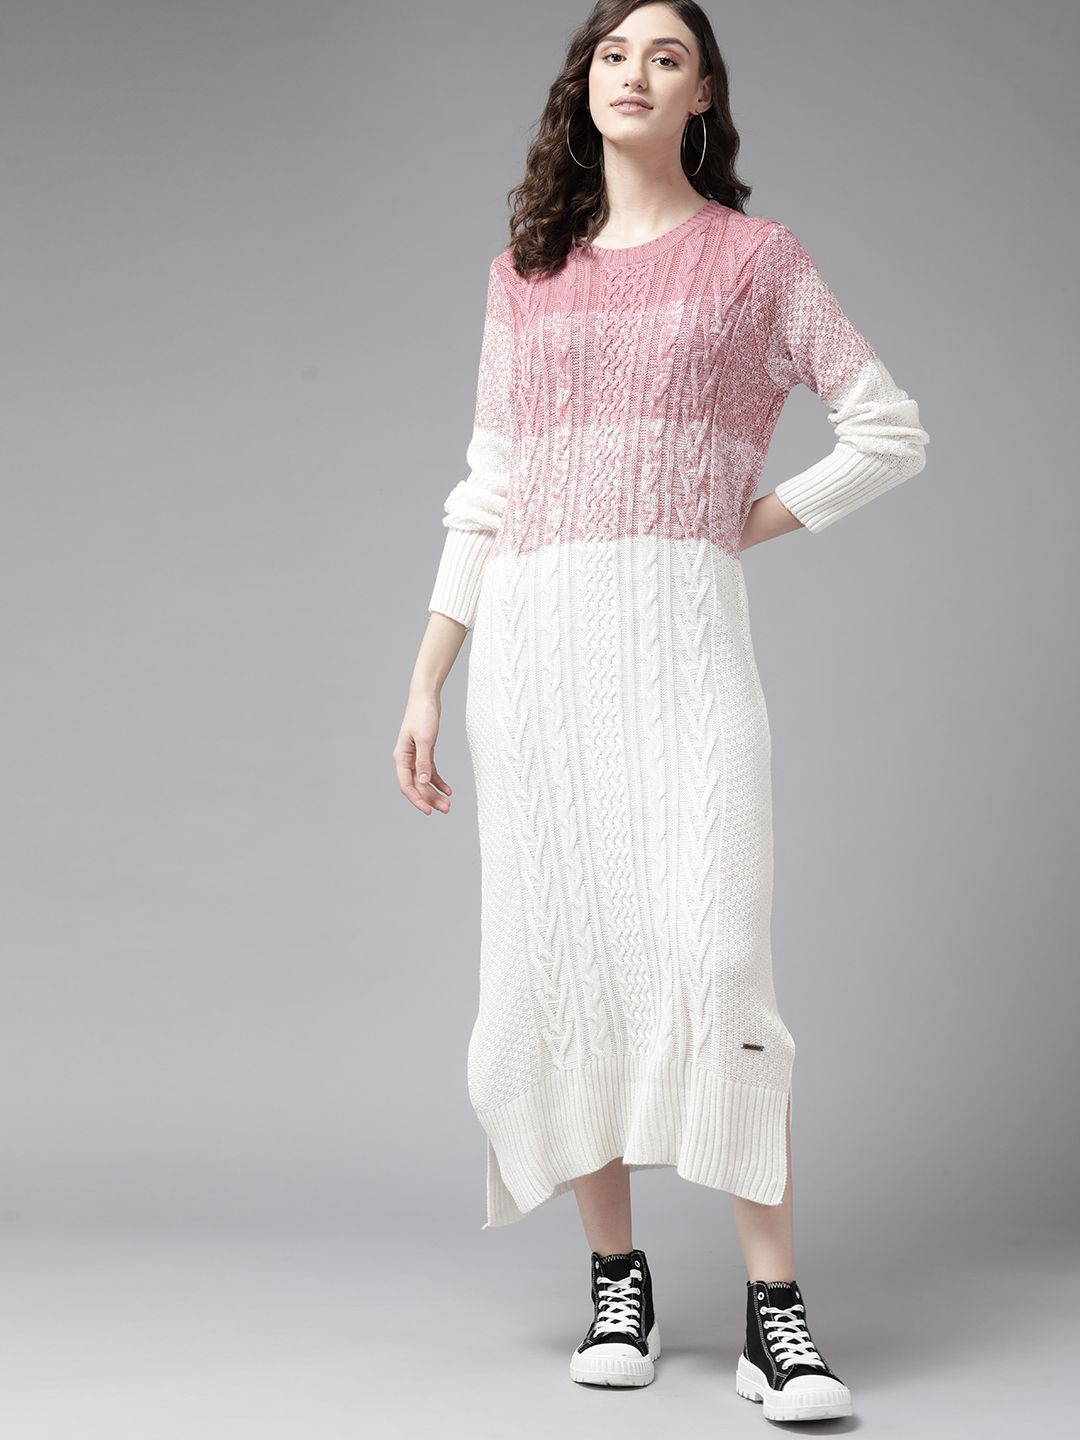 The Roadster Lifestyle Co. White & Pink Cable Knit Jumper Dress Price in India